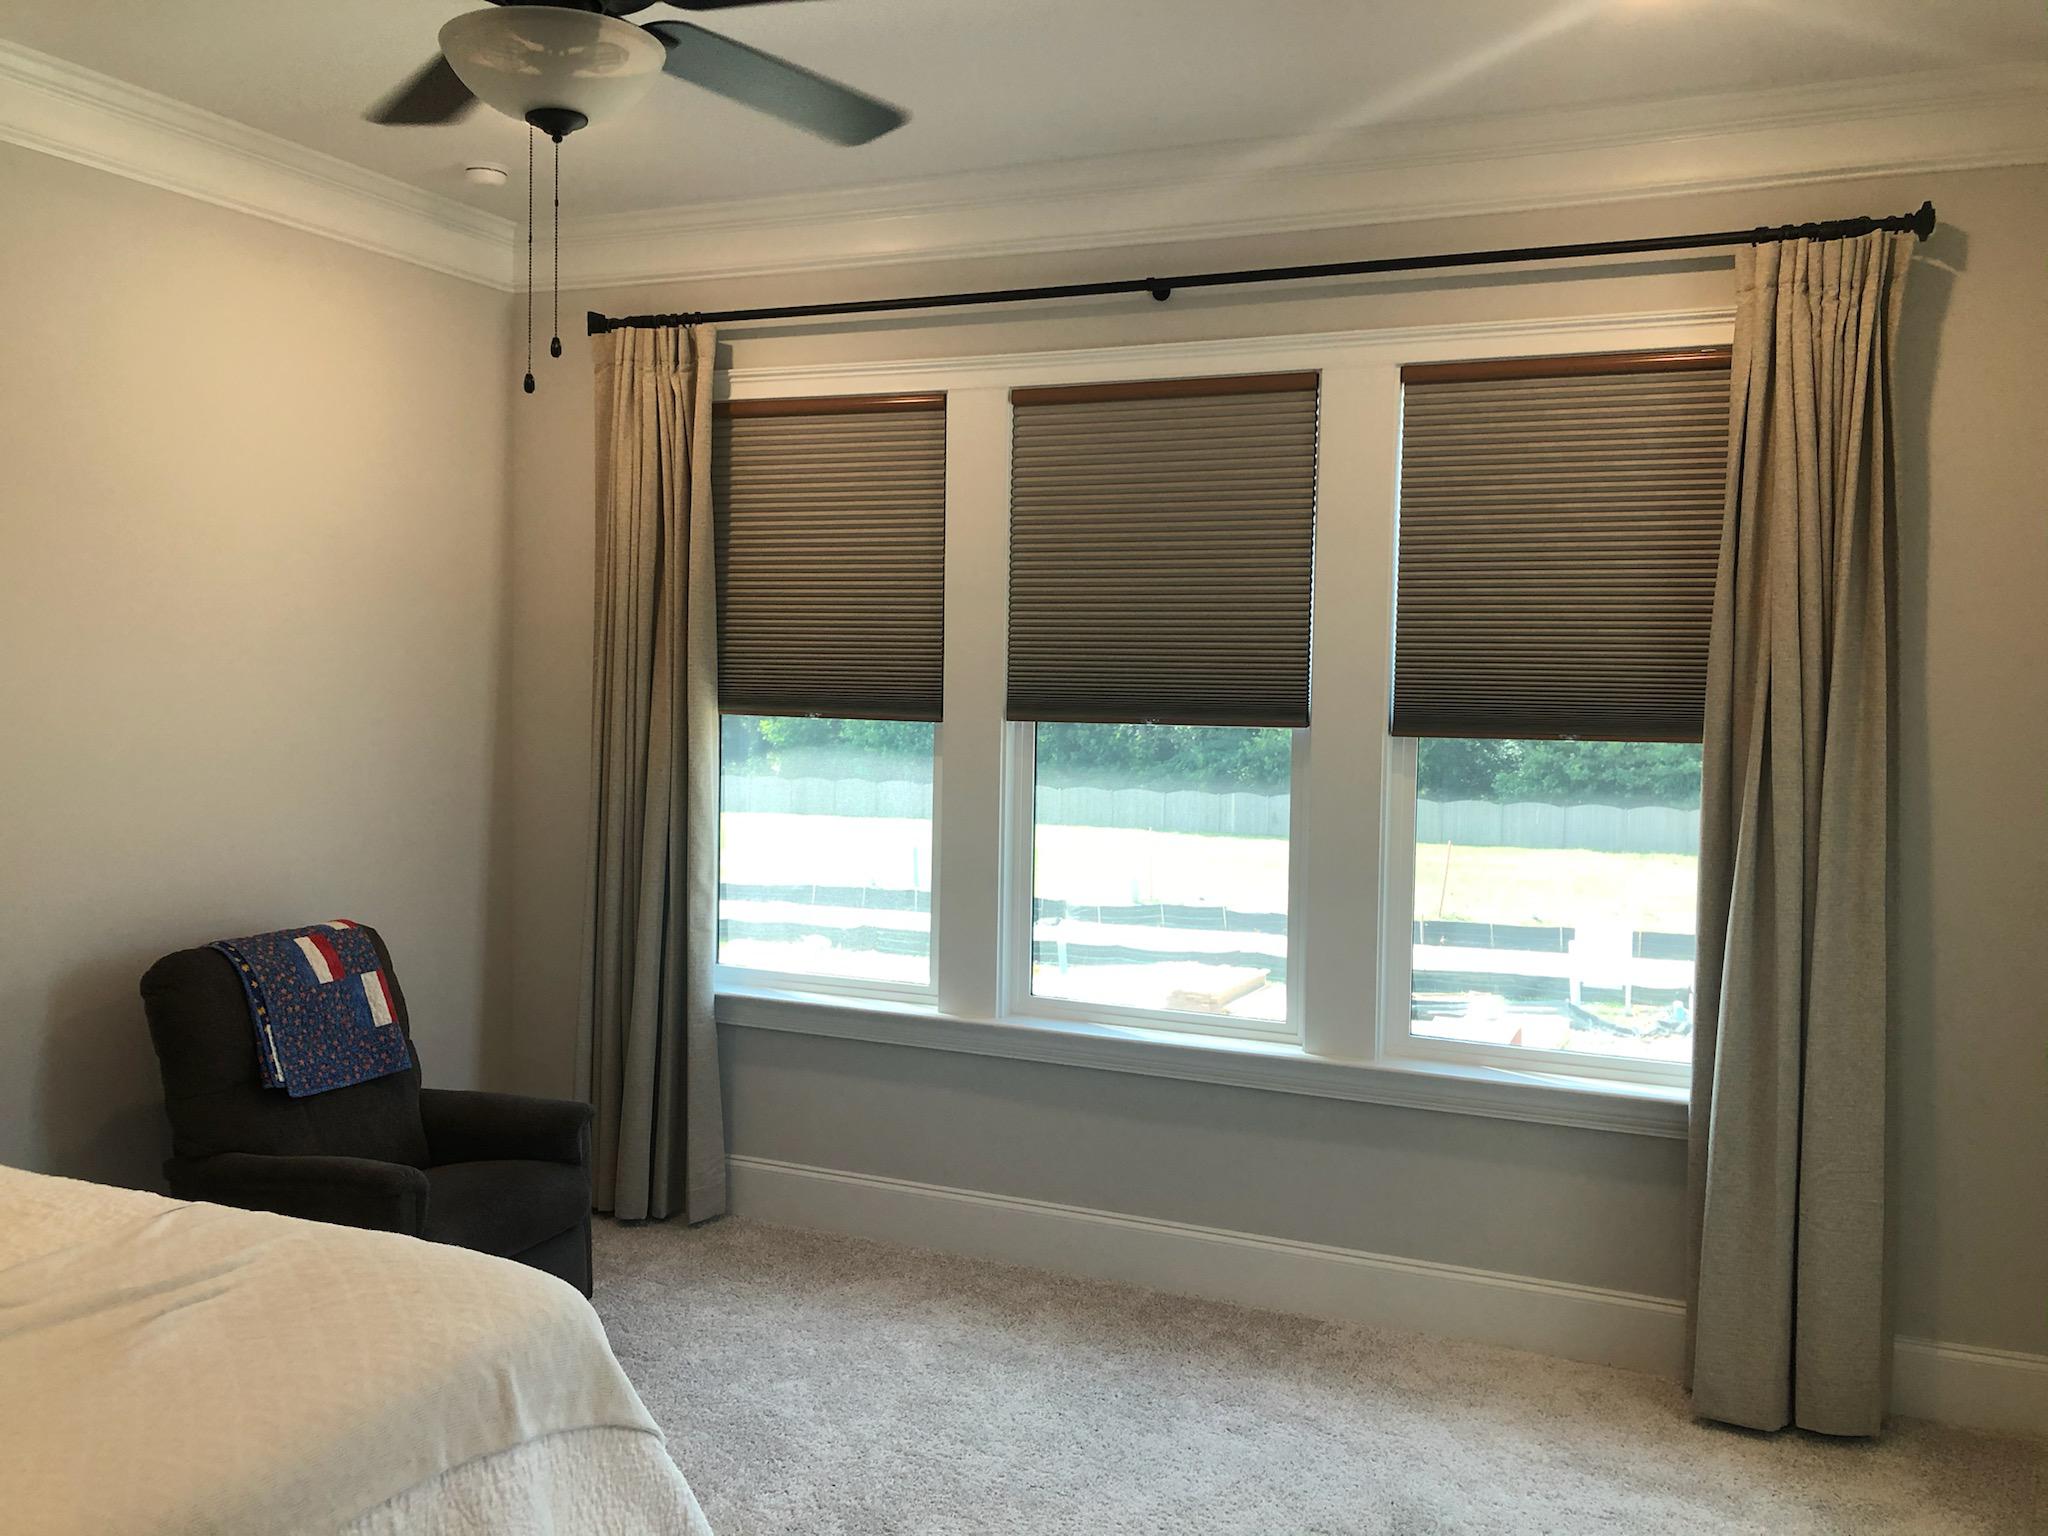 drapery and shades provide the perfect serene environment